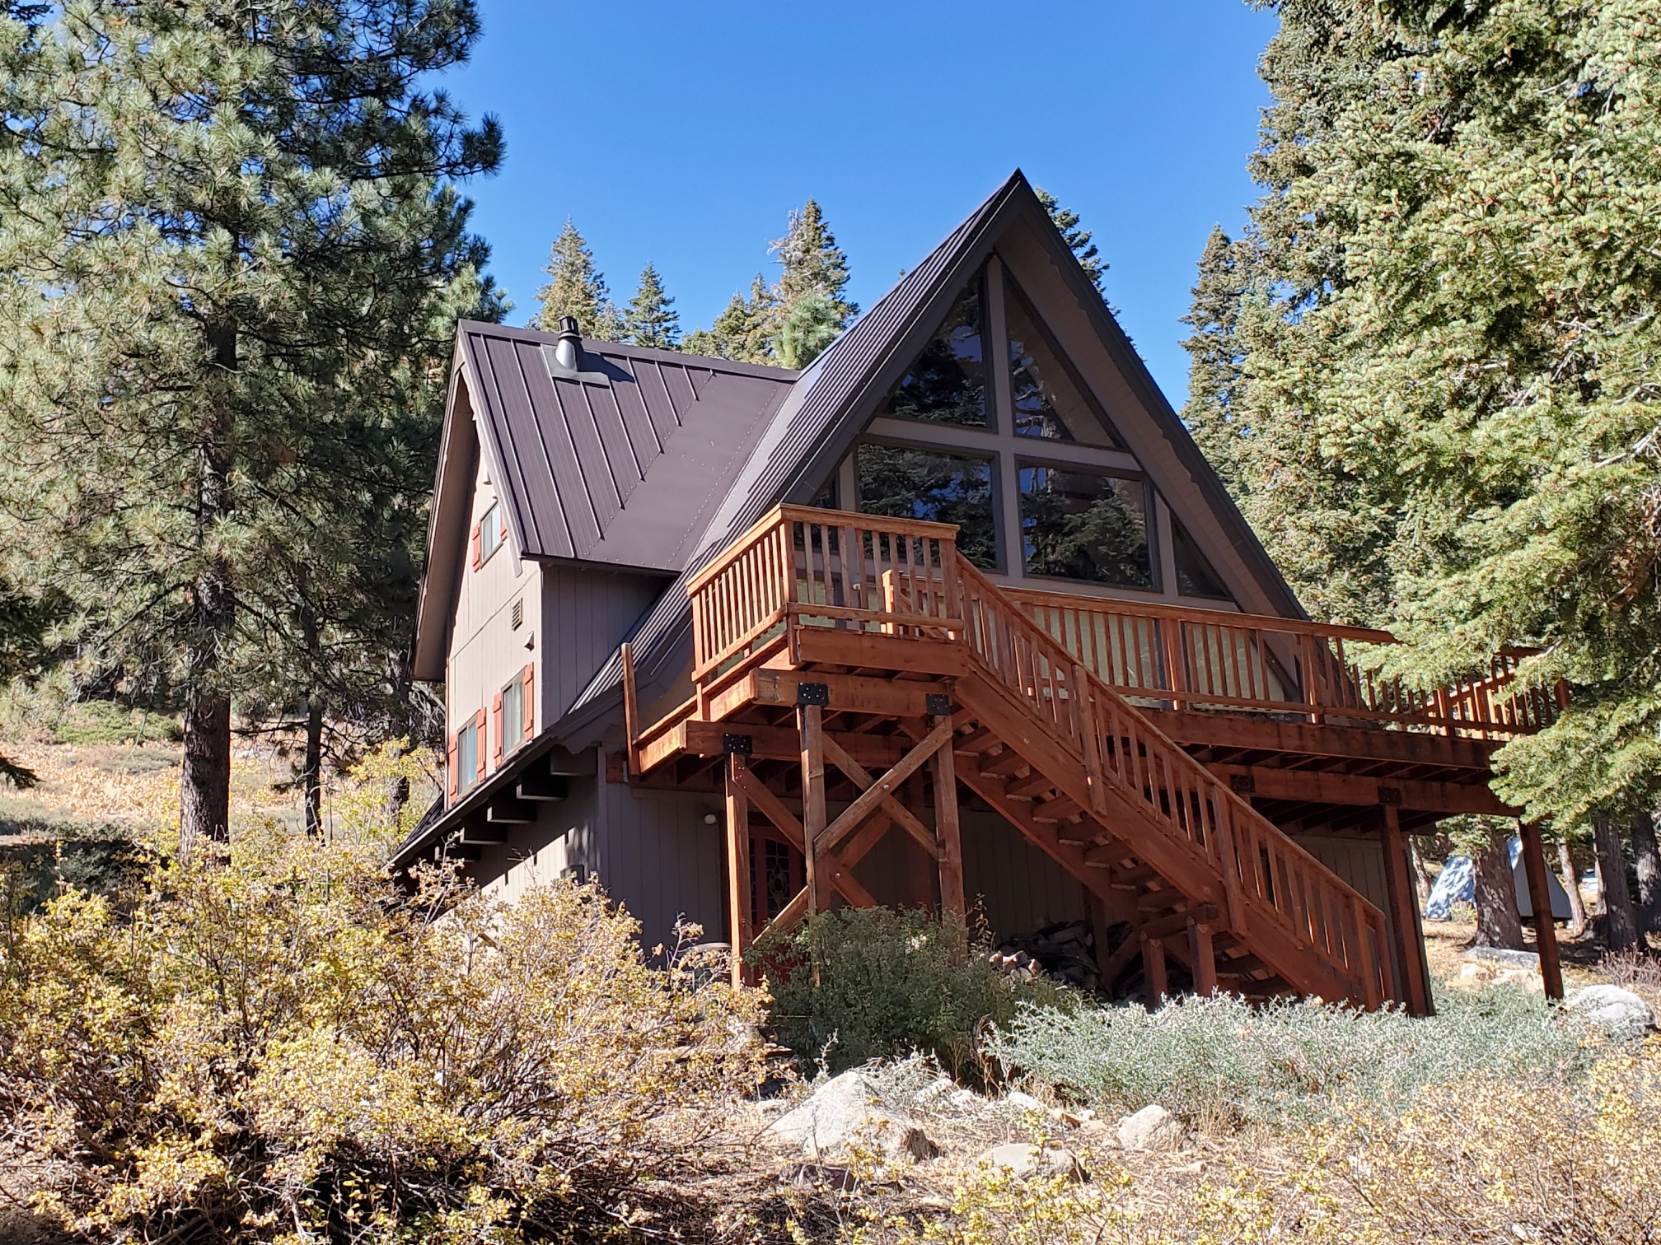 CLASSIC BEAR VALLEY A-FRAME